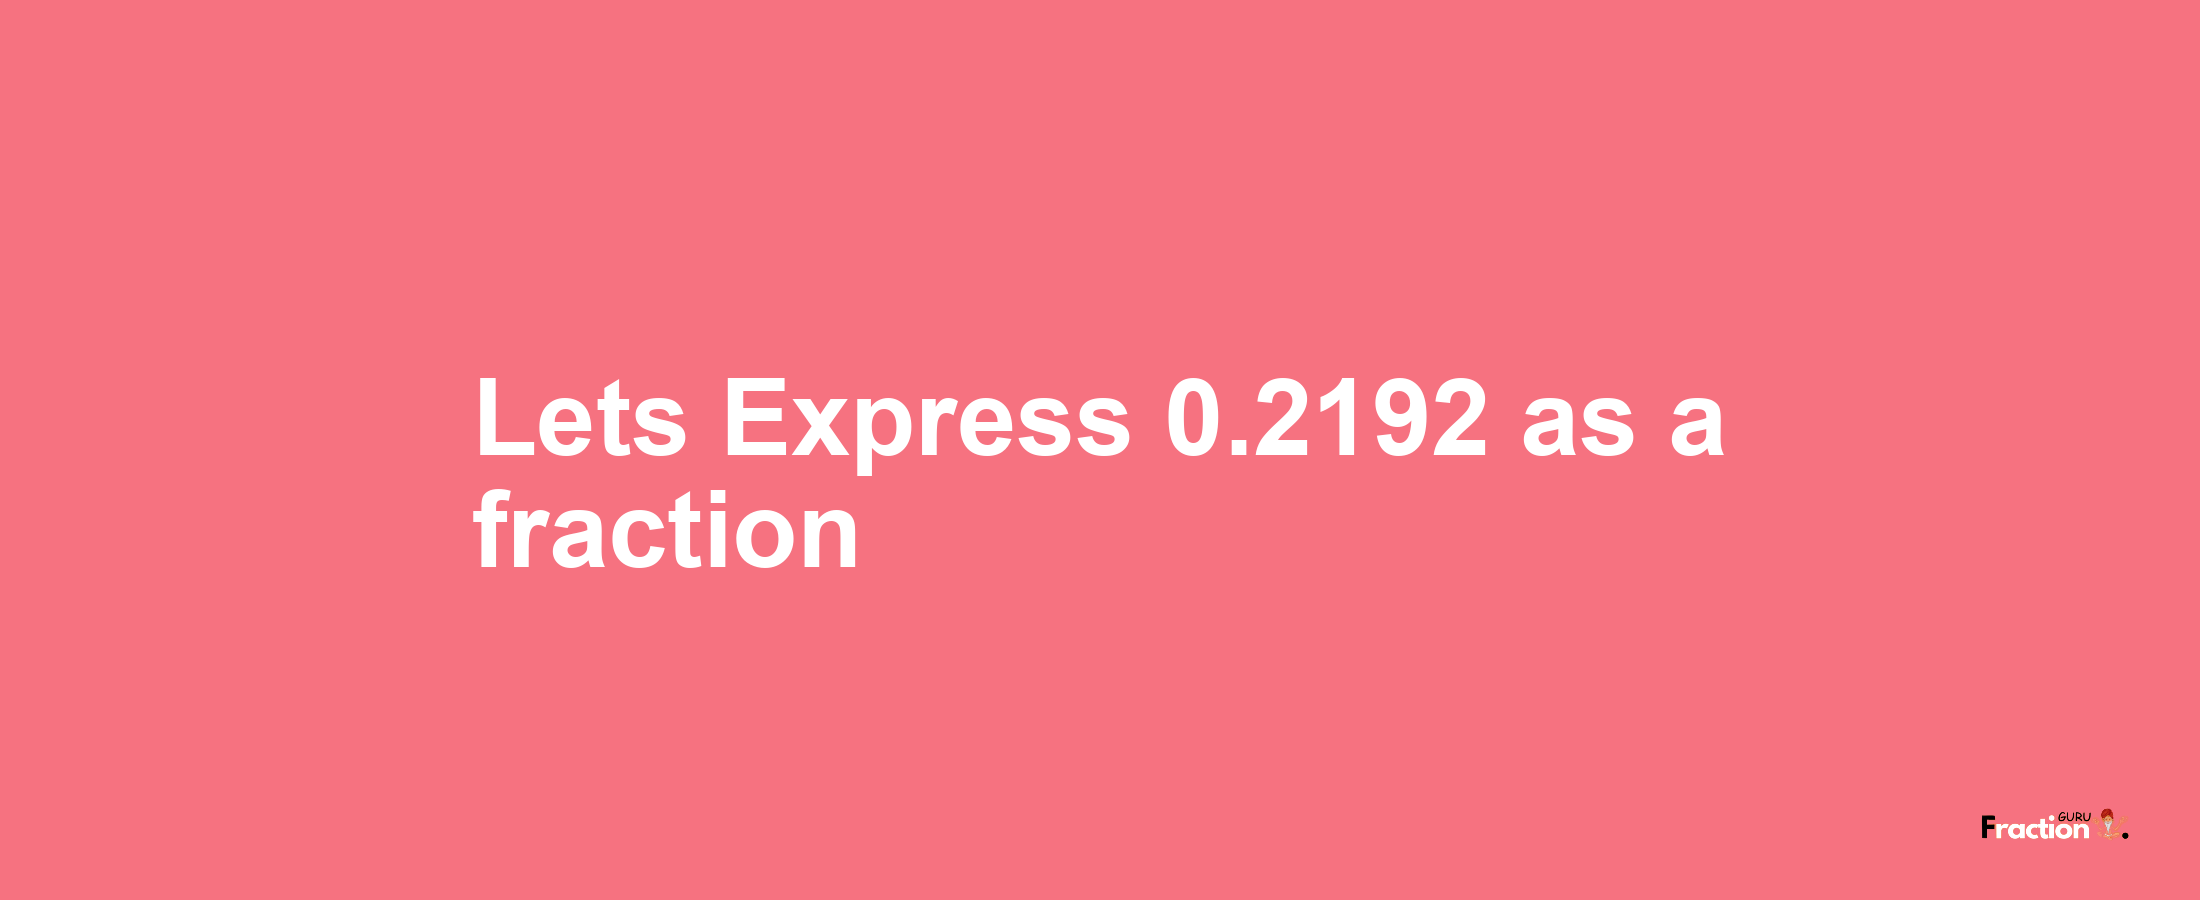 Lets Express 0.2192 as afraction